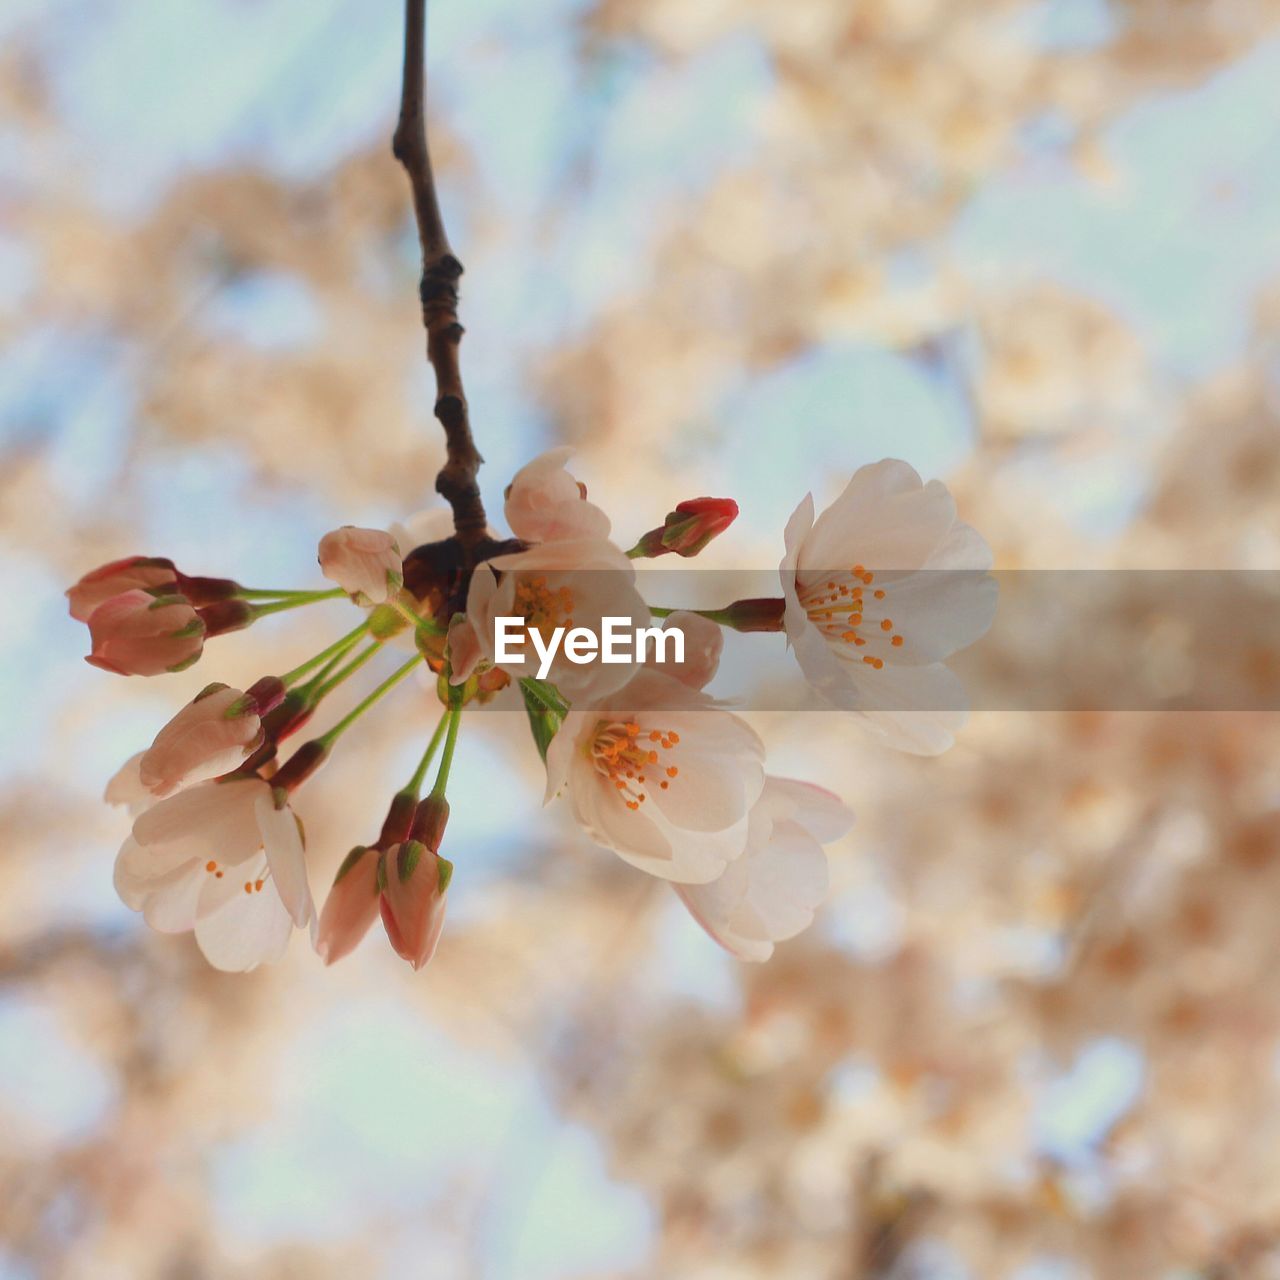 Close-up of cherry blossoms blooming outdoors